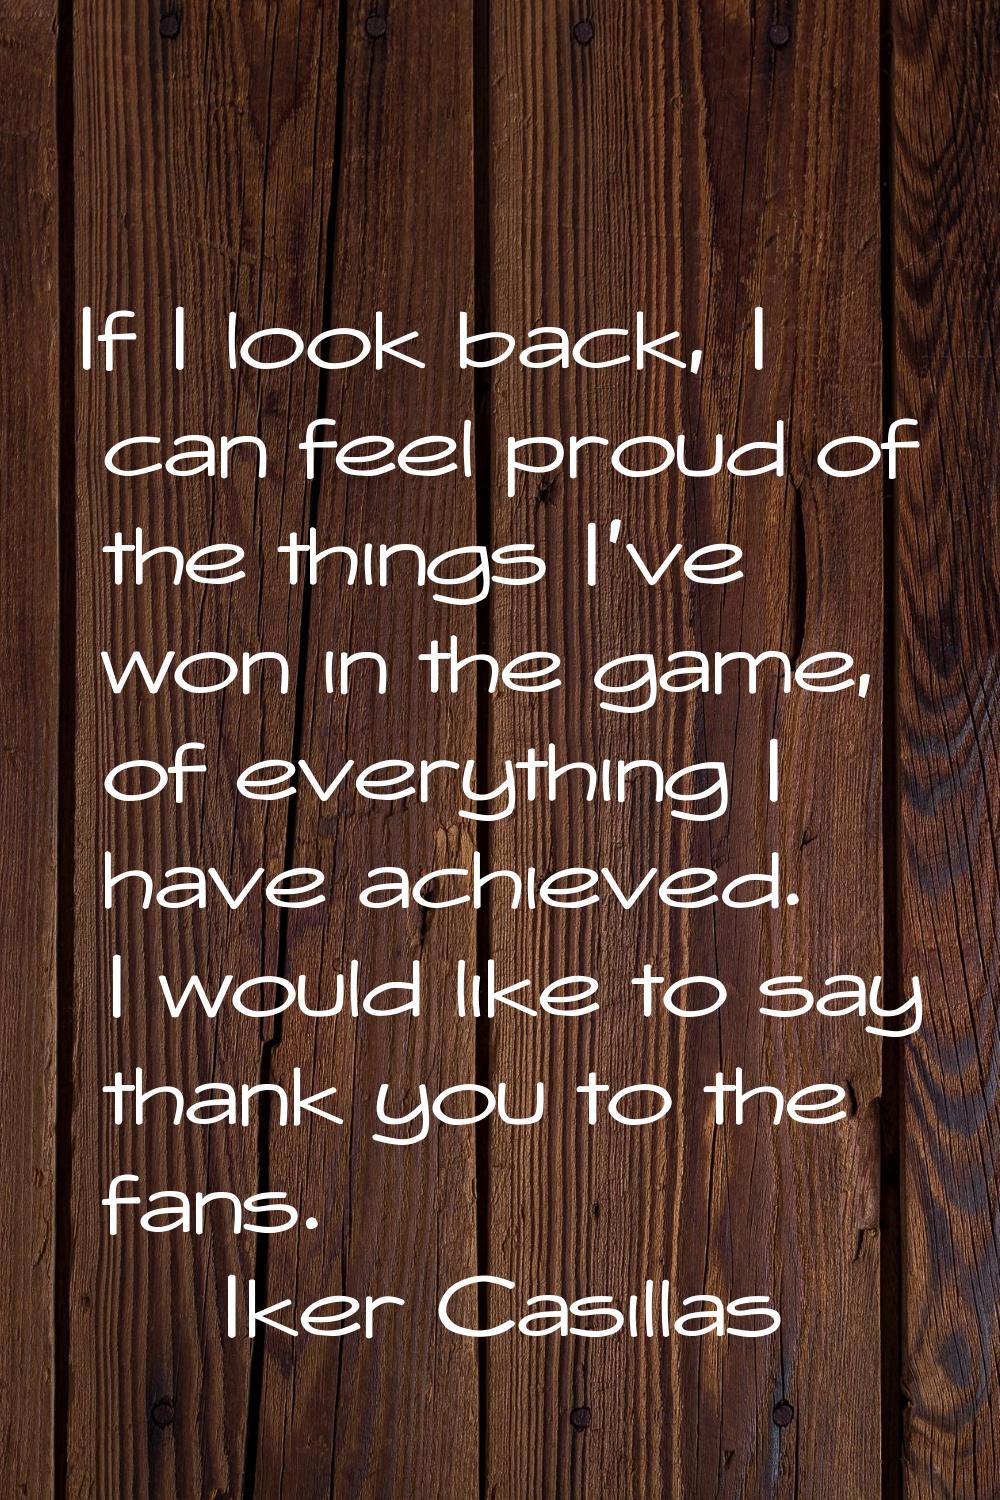 If I look back, I can feel proud of the things I've won in the game, of everything I have achieved.